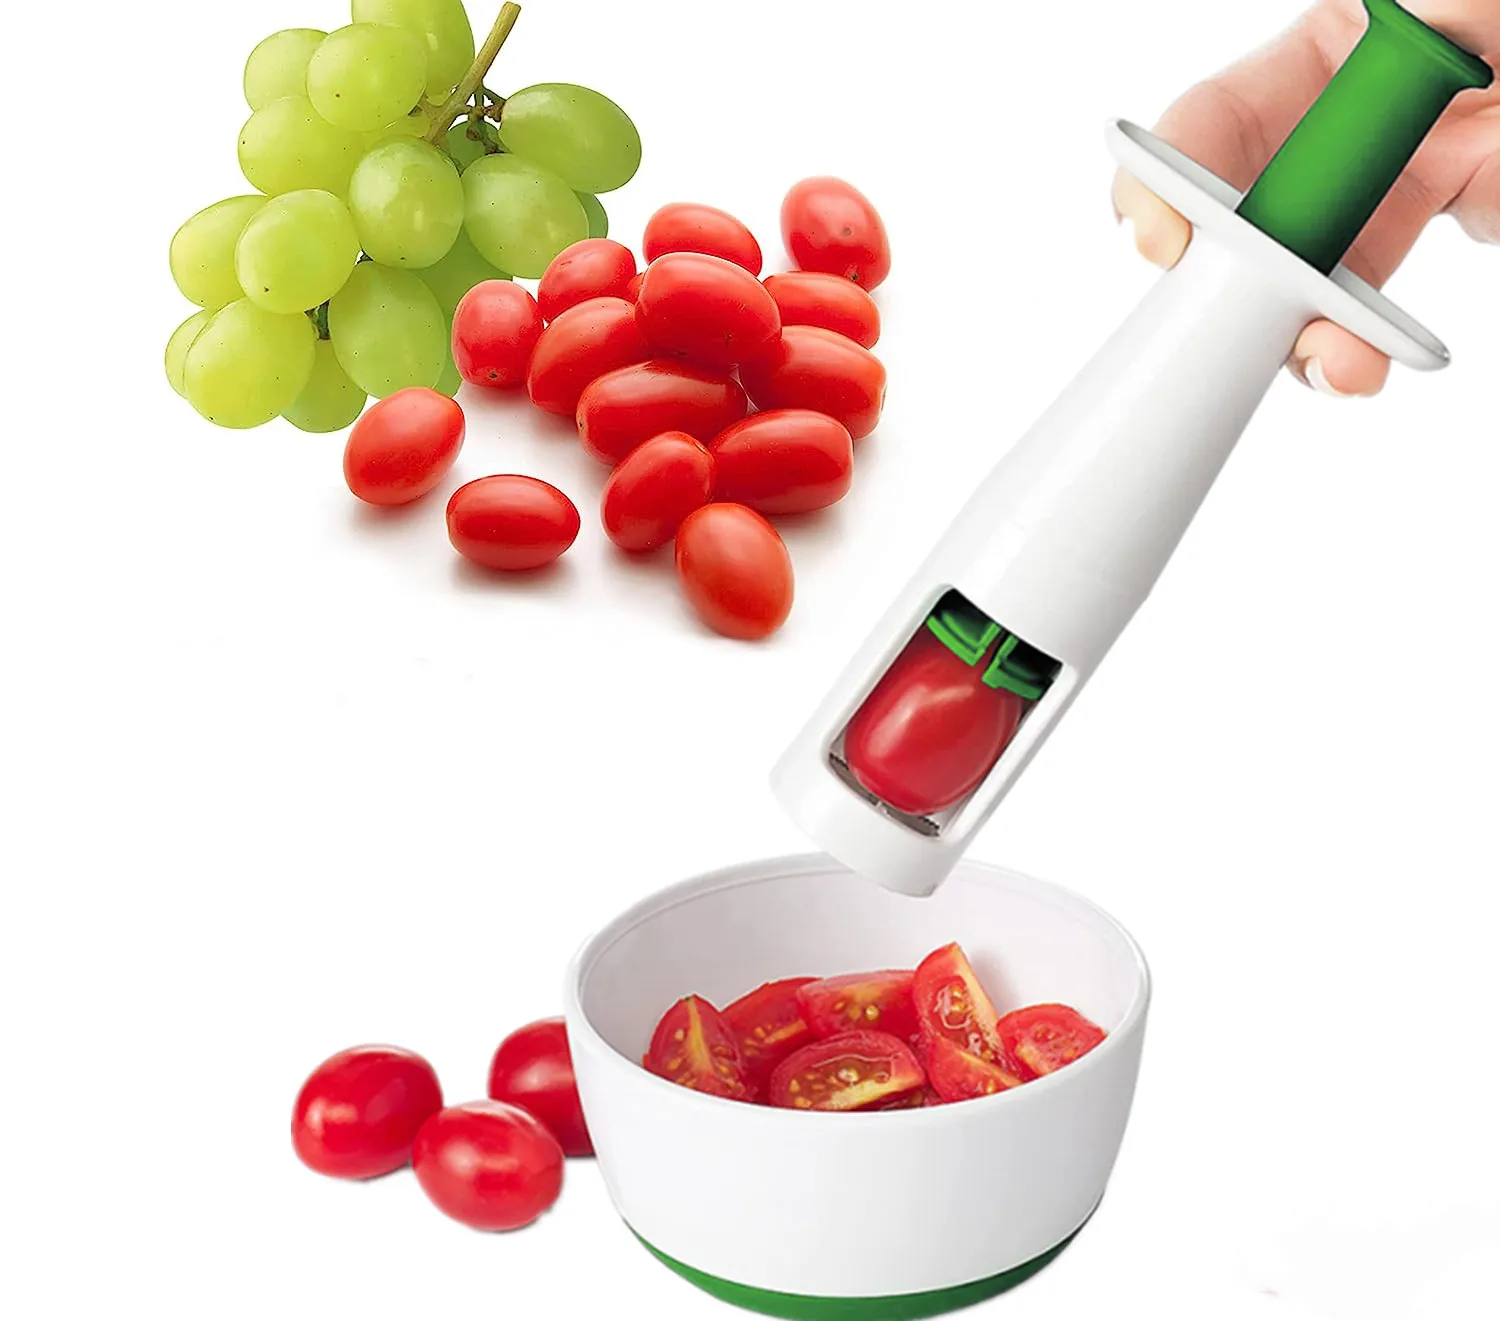 https://ae01.alicdn.com/kf/S437527e80fab4c4b99645c94d40368d6c/Creative-Grape-Tomato-Cutter-Slicer-Small-Fruit-Splitter-Tools-for-Kitchen-Salad-Baking-Cooking-Accessories-Manual.jpg